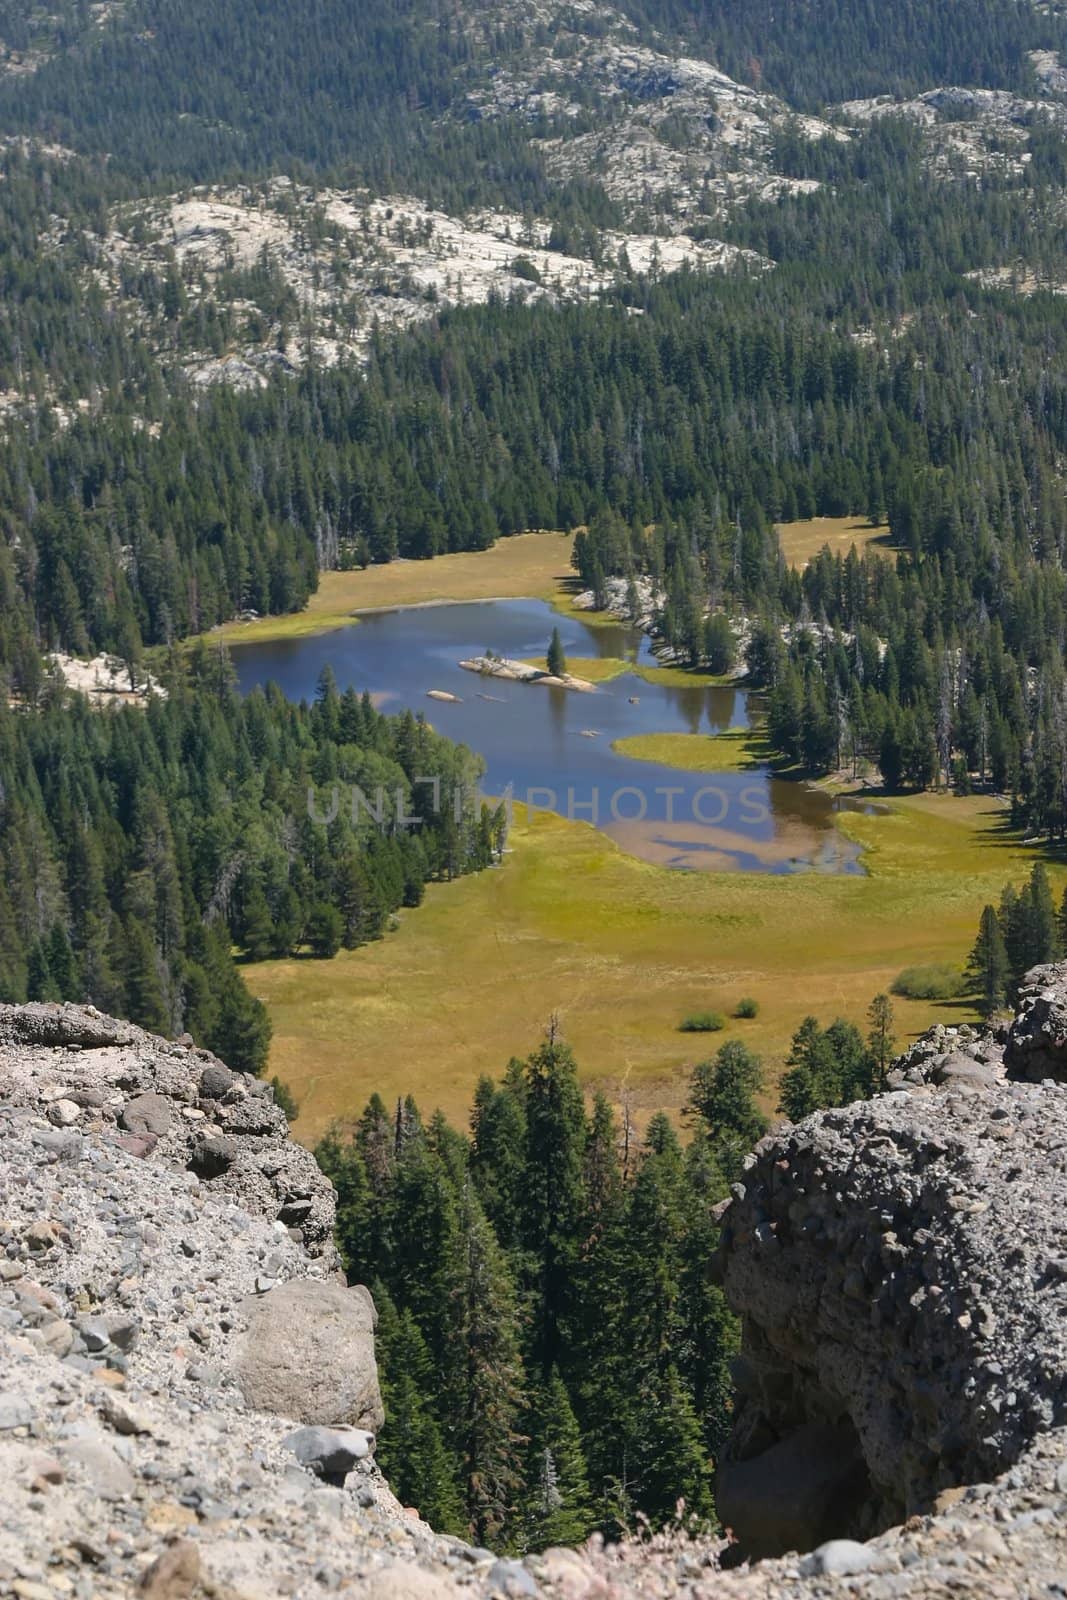 Bear Valley is a census-designated place in Alpine County, California, United States.